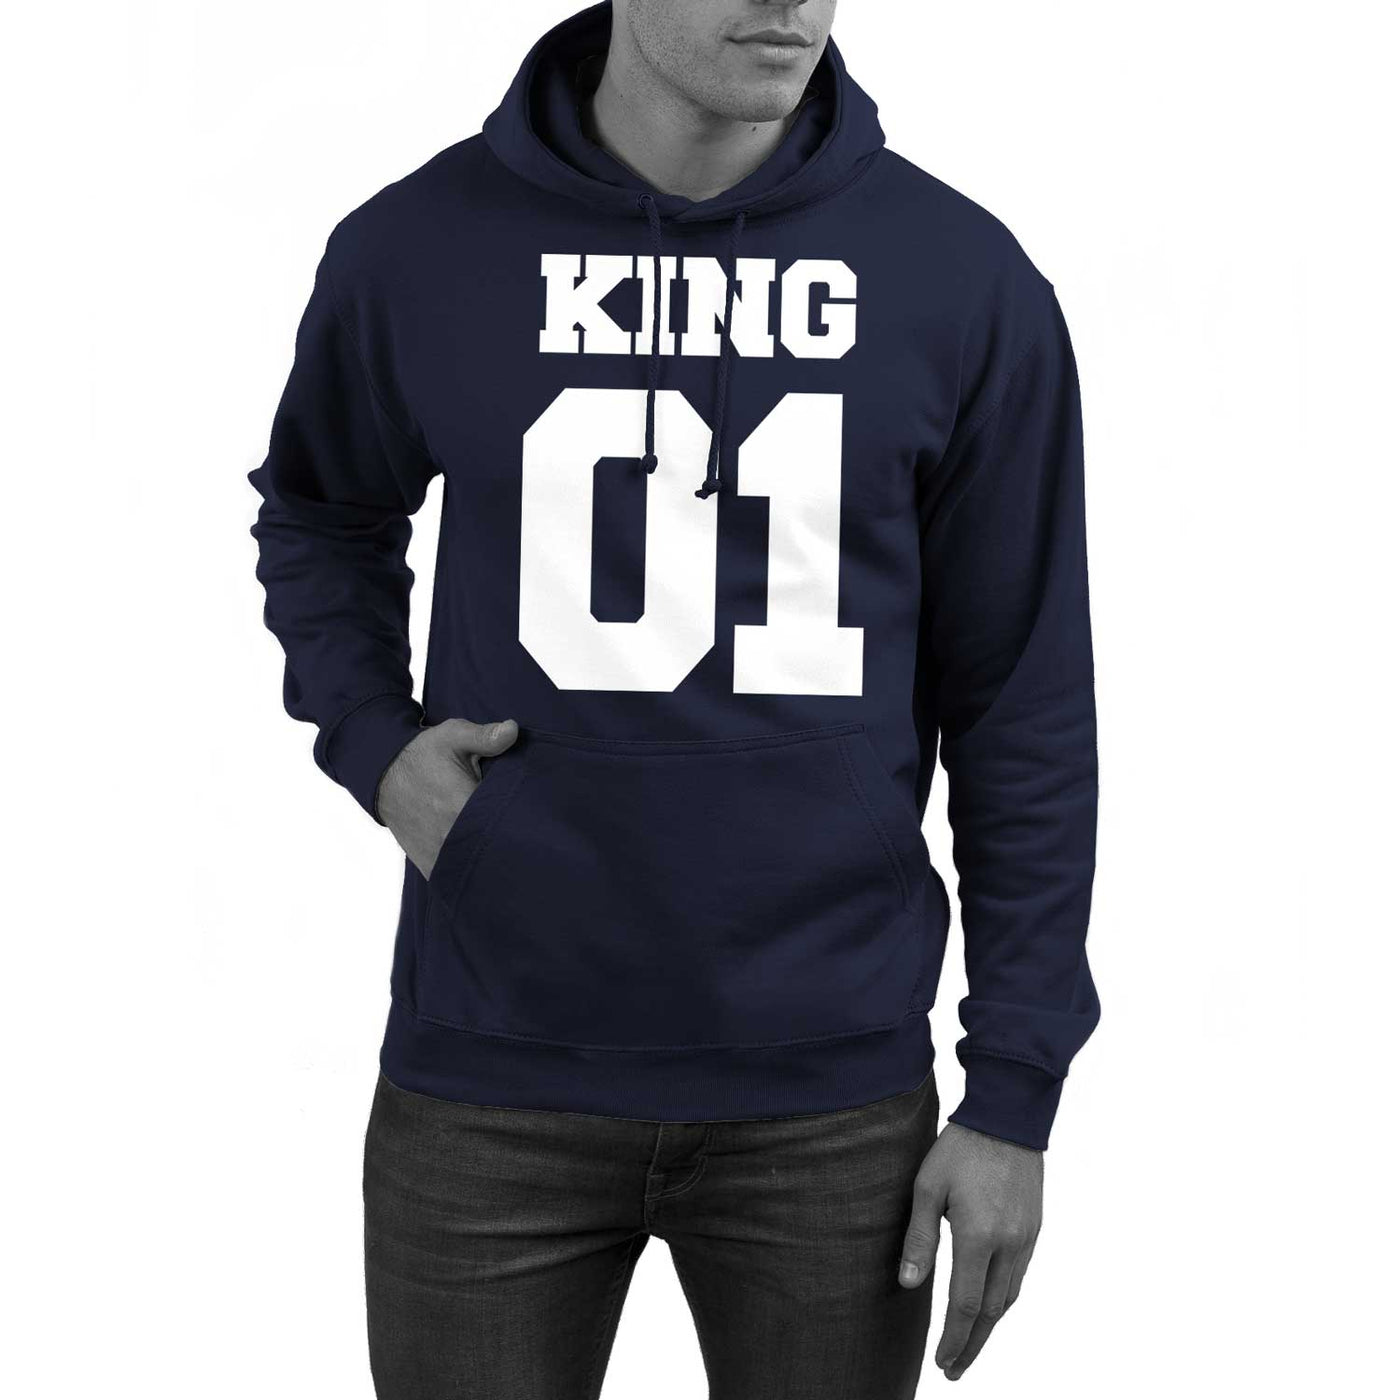 king_navy_front